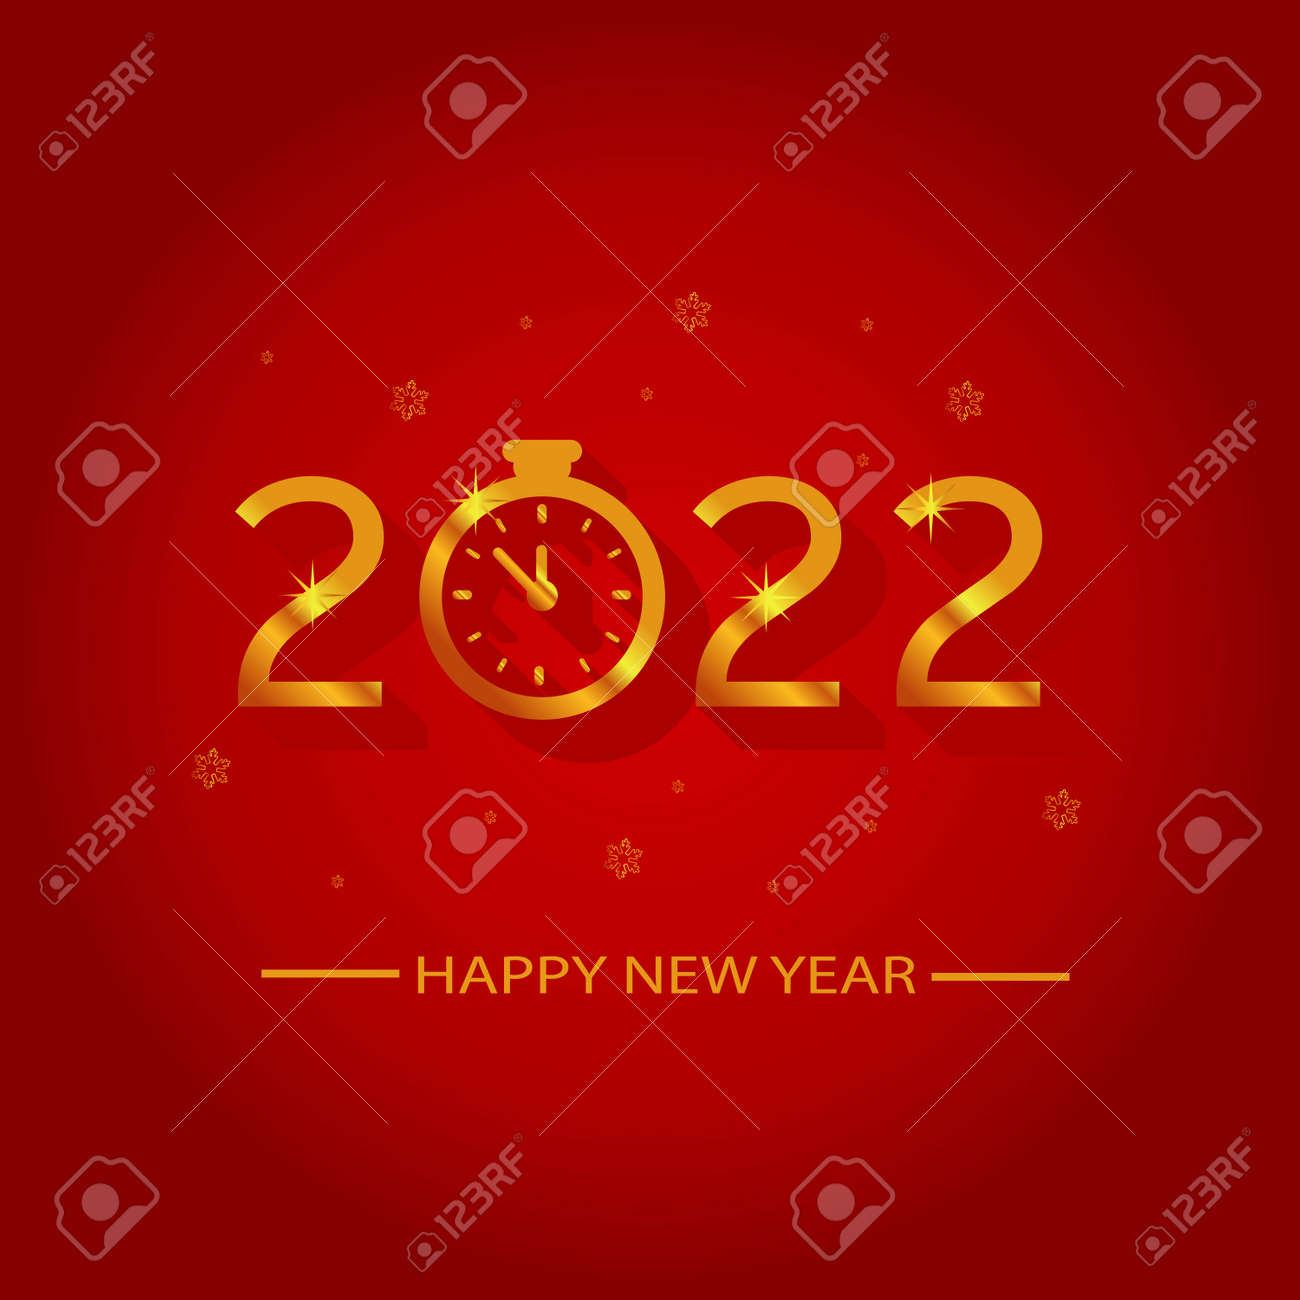 Greeting Card On Merry Christmas And Happy New Year Wallpaper